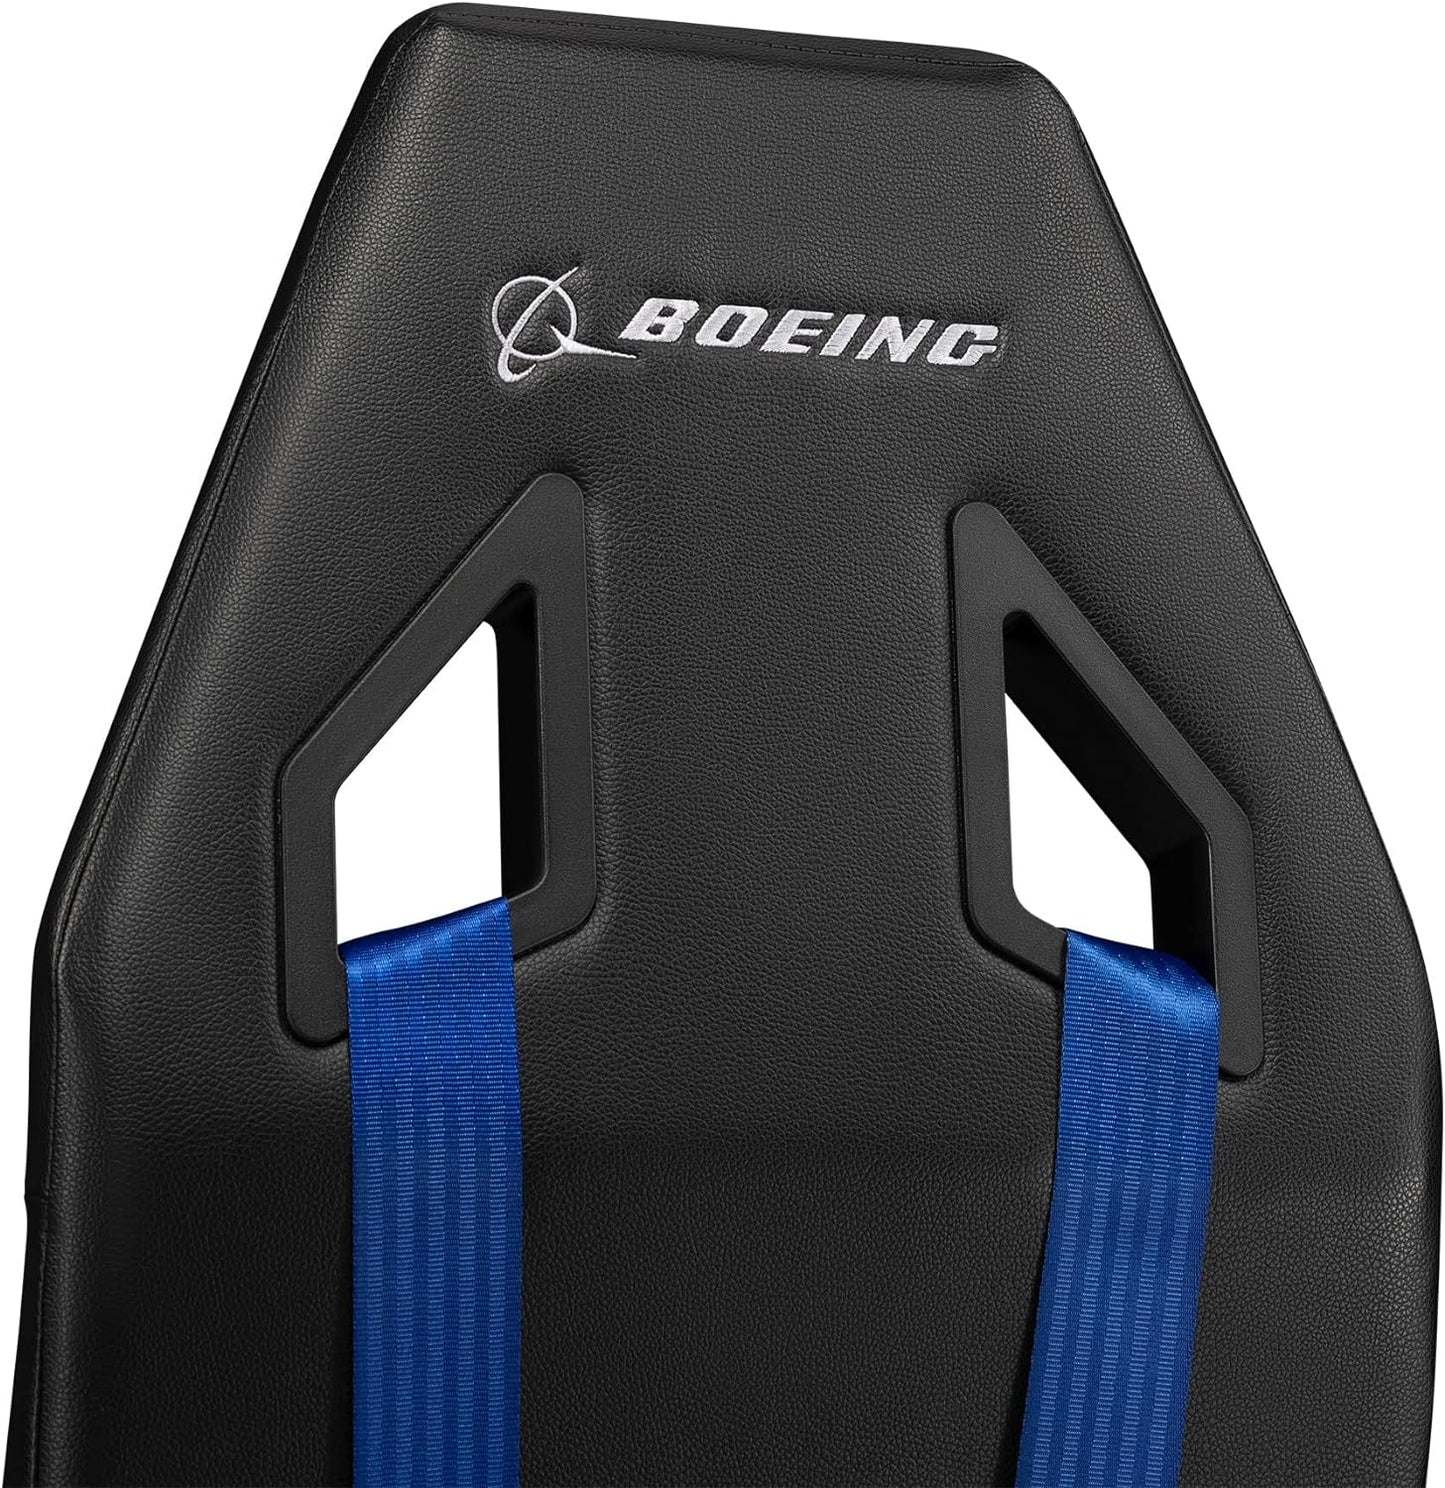 Next Level Racing Flight Simulator: Boeing Commercial Edition